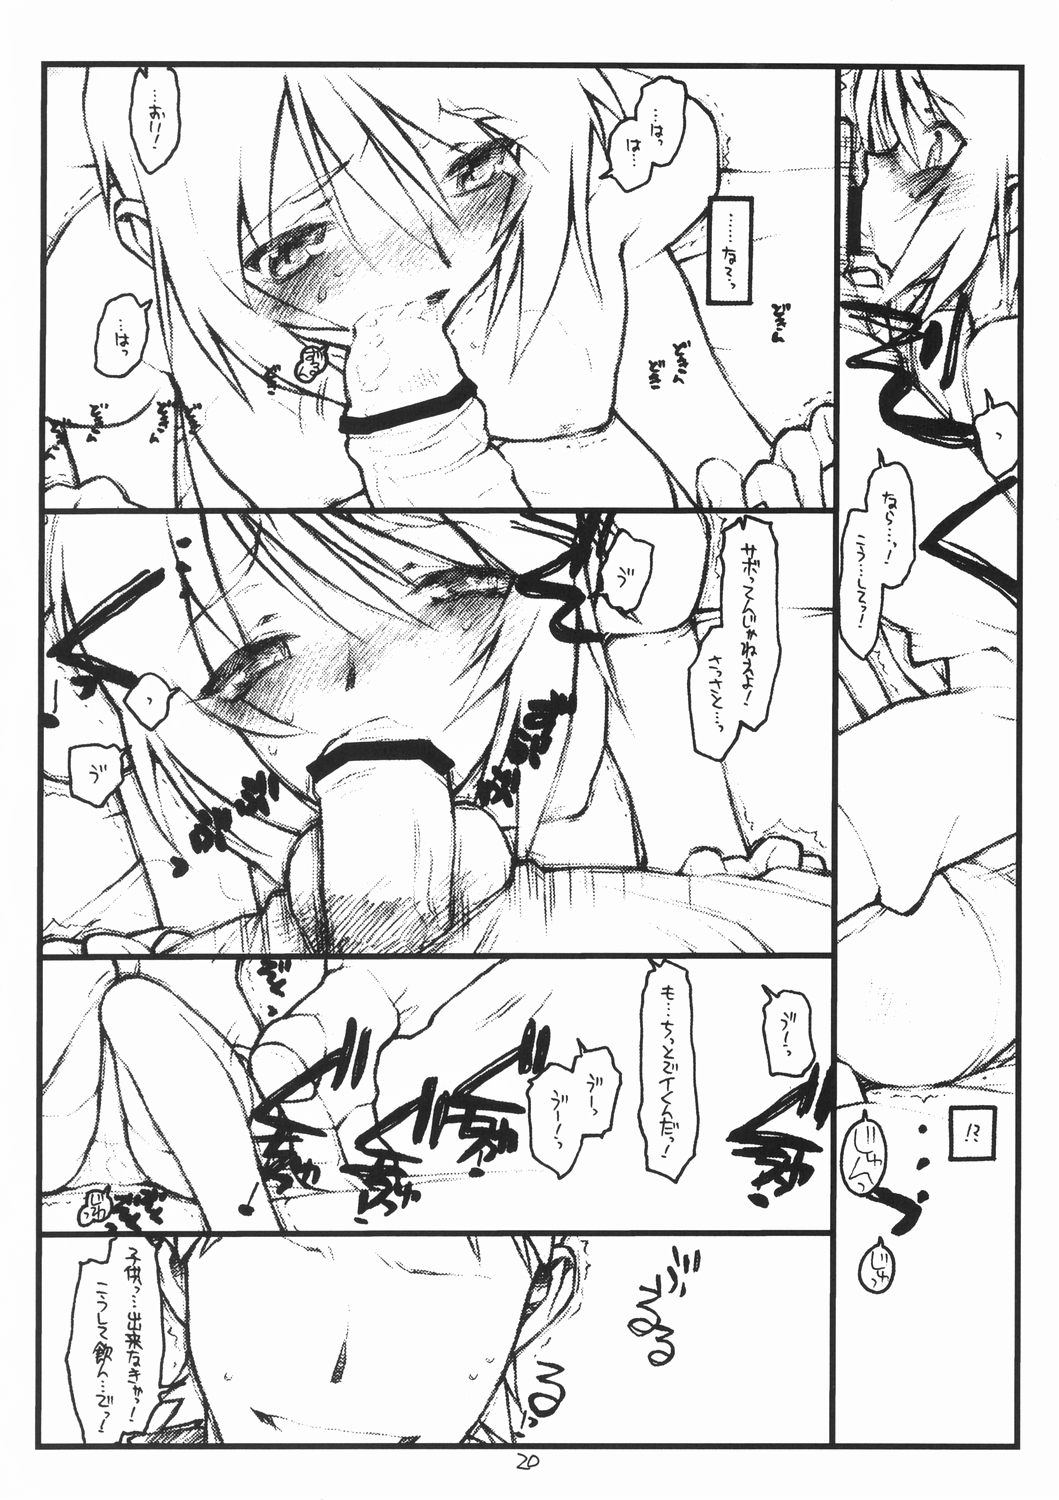 (SC28) [bolze. (rit.)] Miscoordination. (Mobile Suit Gundam SEED DESTINY) page 19 full